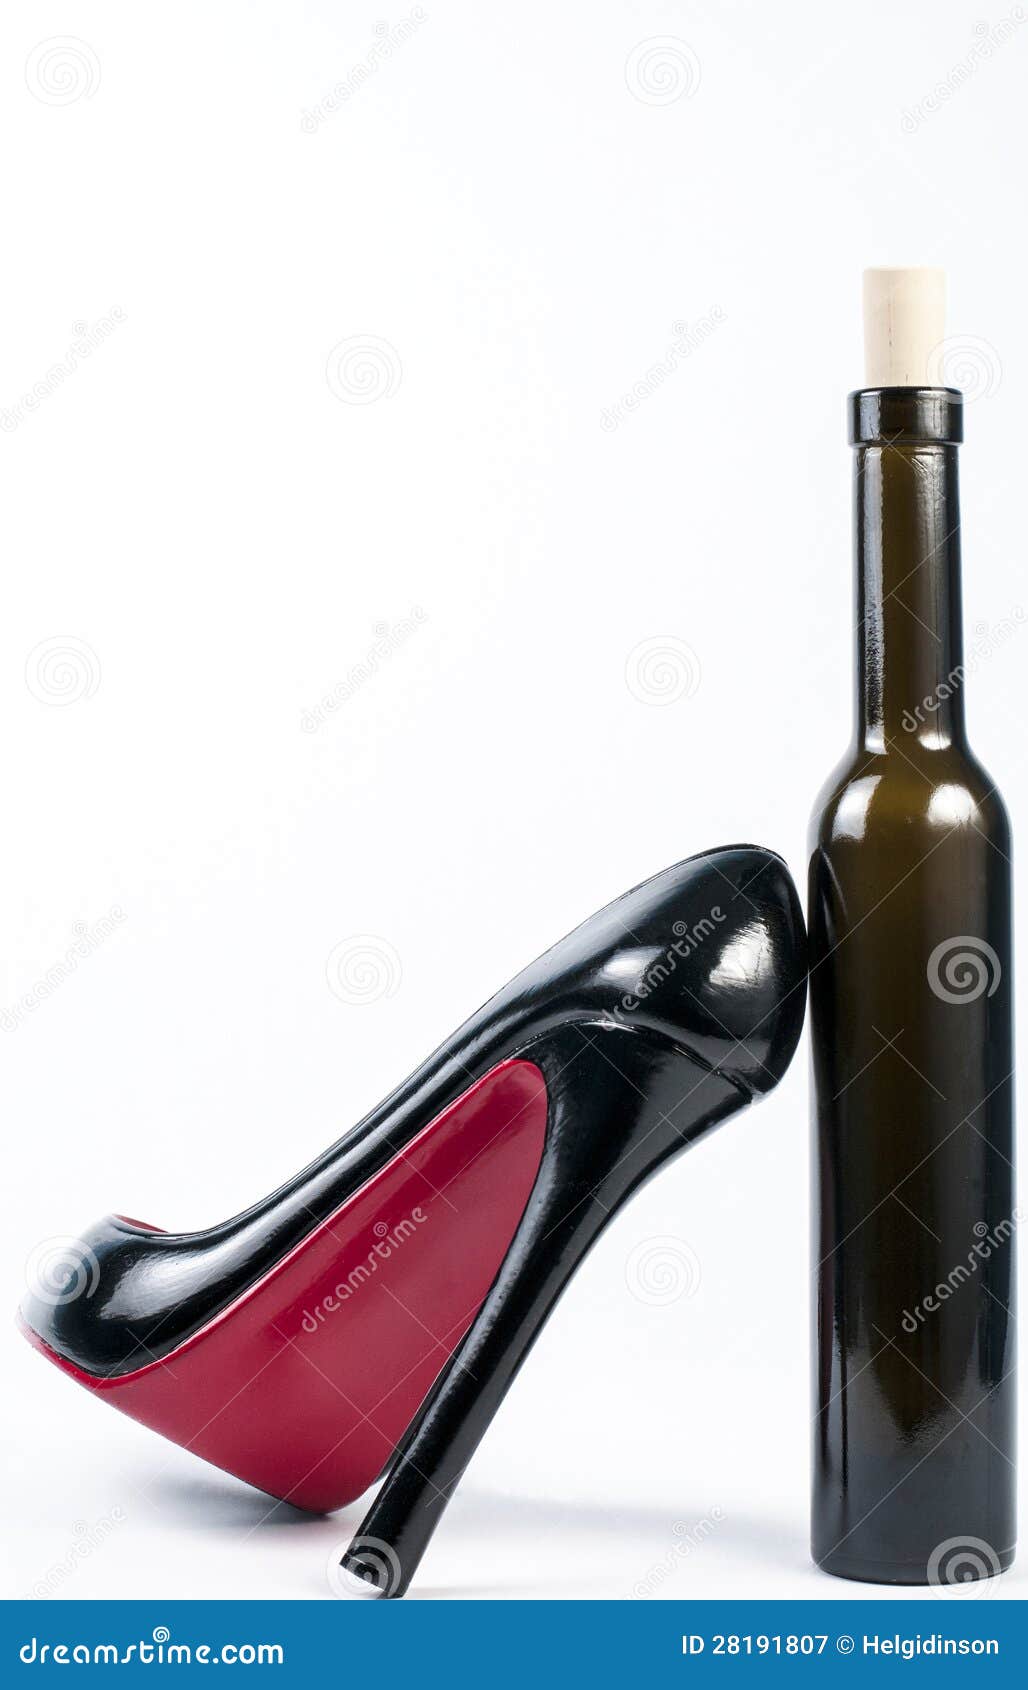 Human leg with high heels and stocking on table, wine glasses in background  stock photo